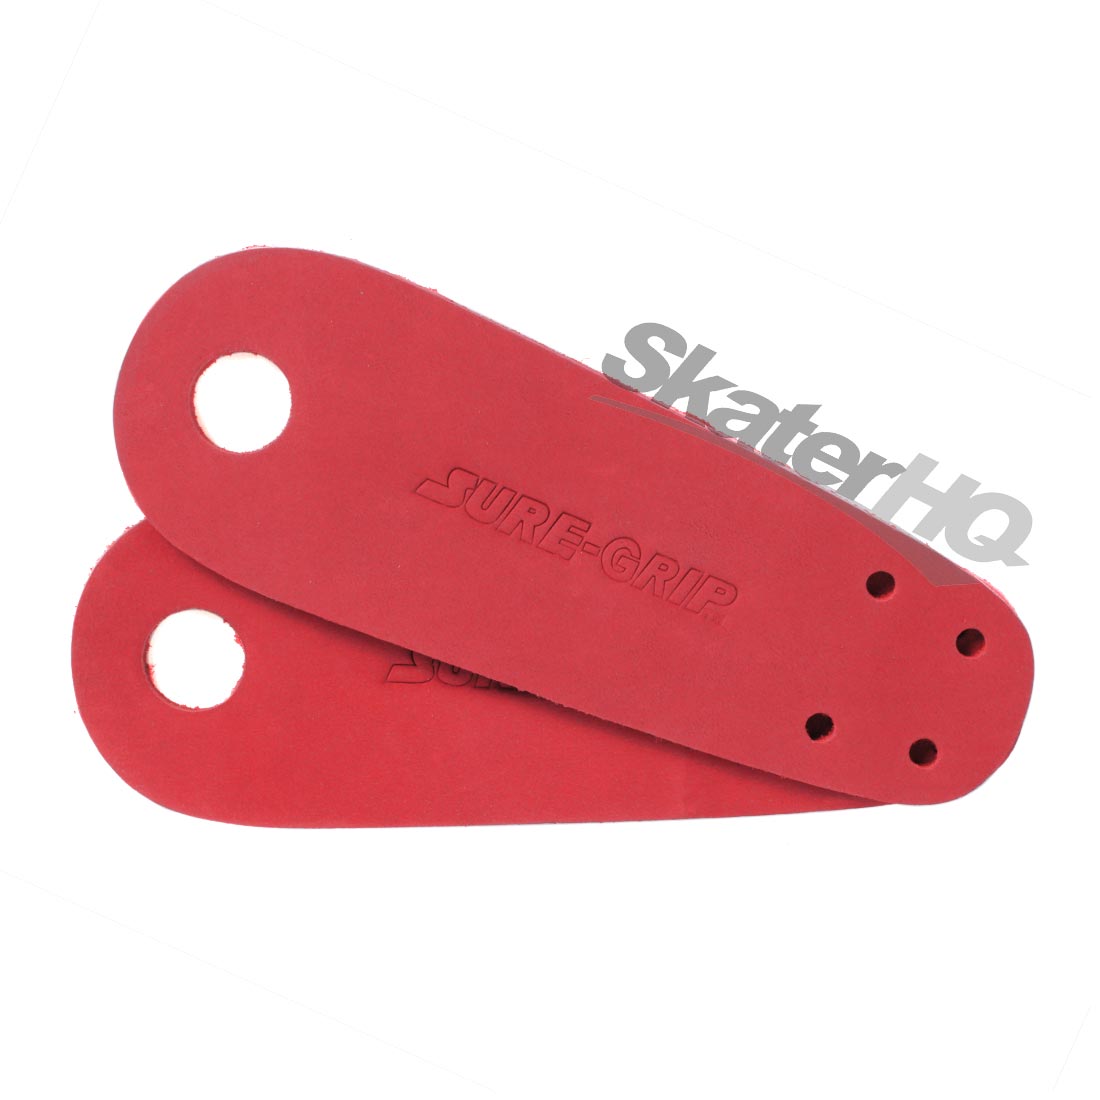 Sure-Grip Toe Guards - Red Roller Skate Hardware and Parts